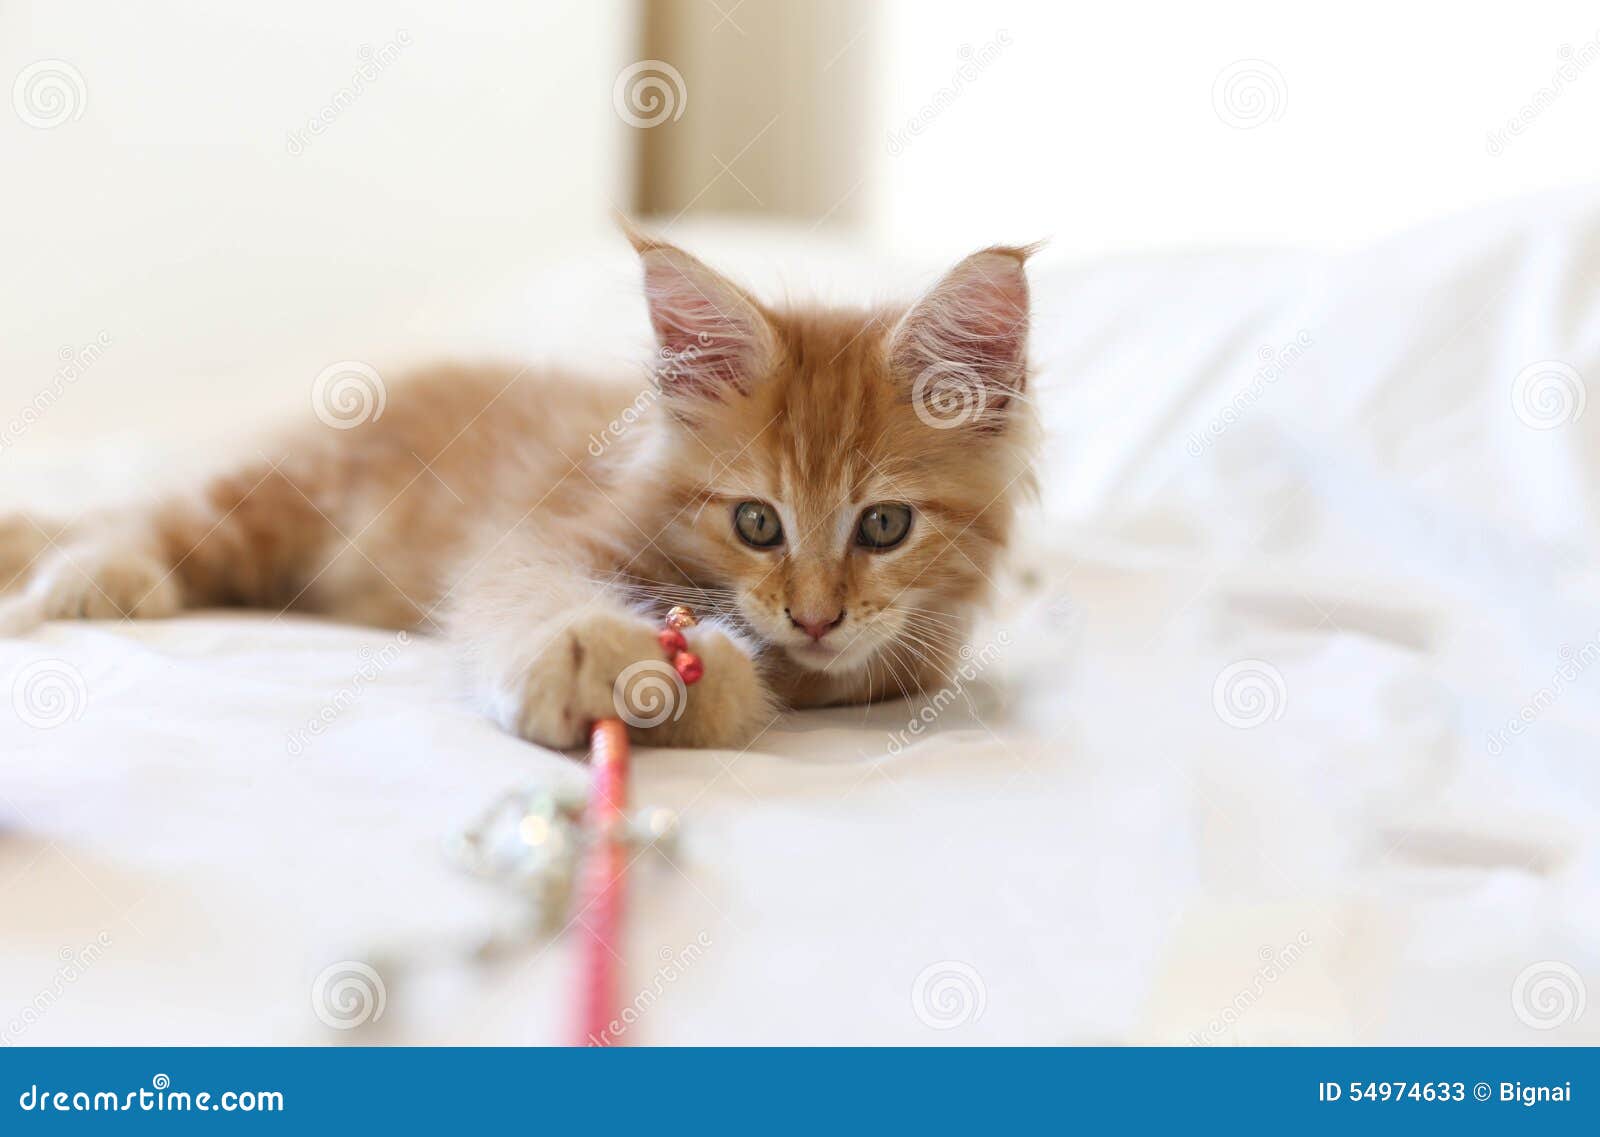 Cat Maine Coon Kitten Lying And Playing With Toy Stock Image